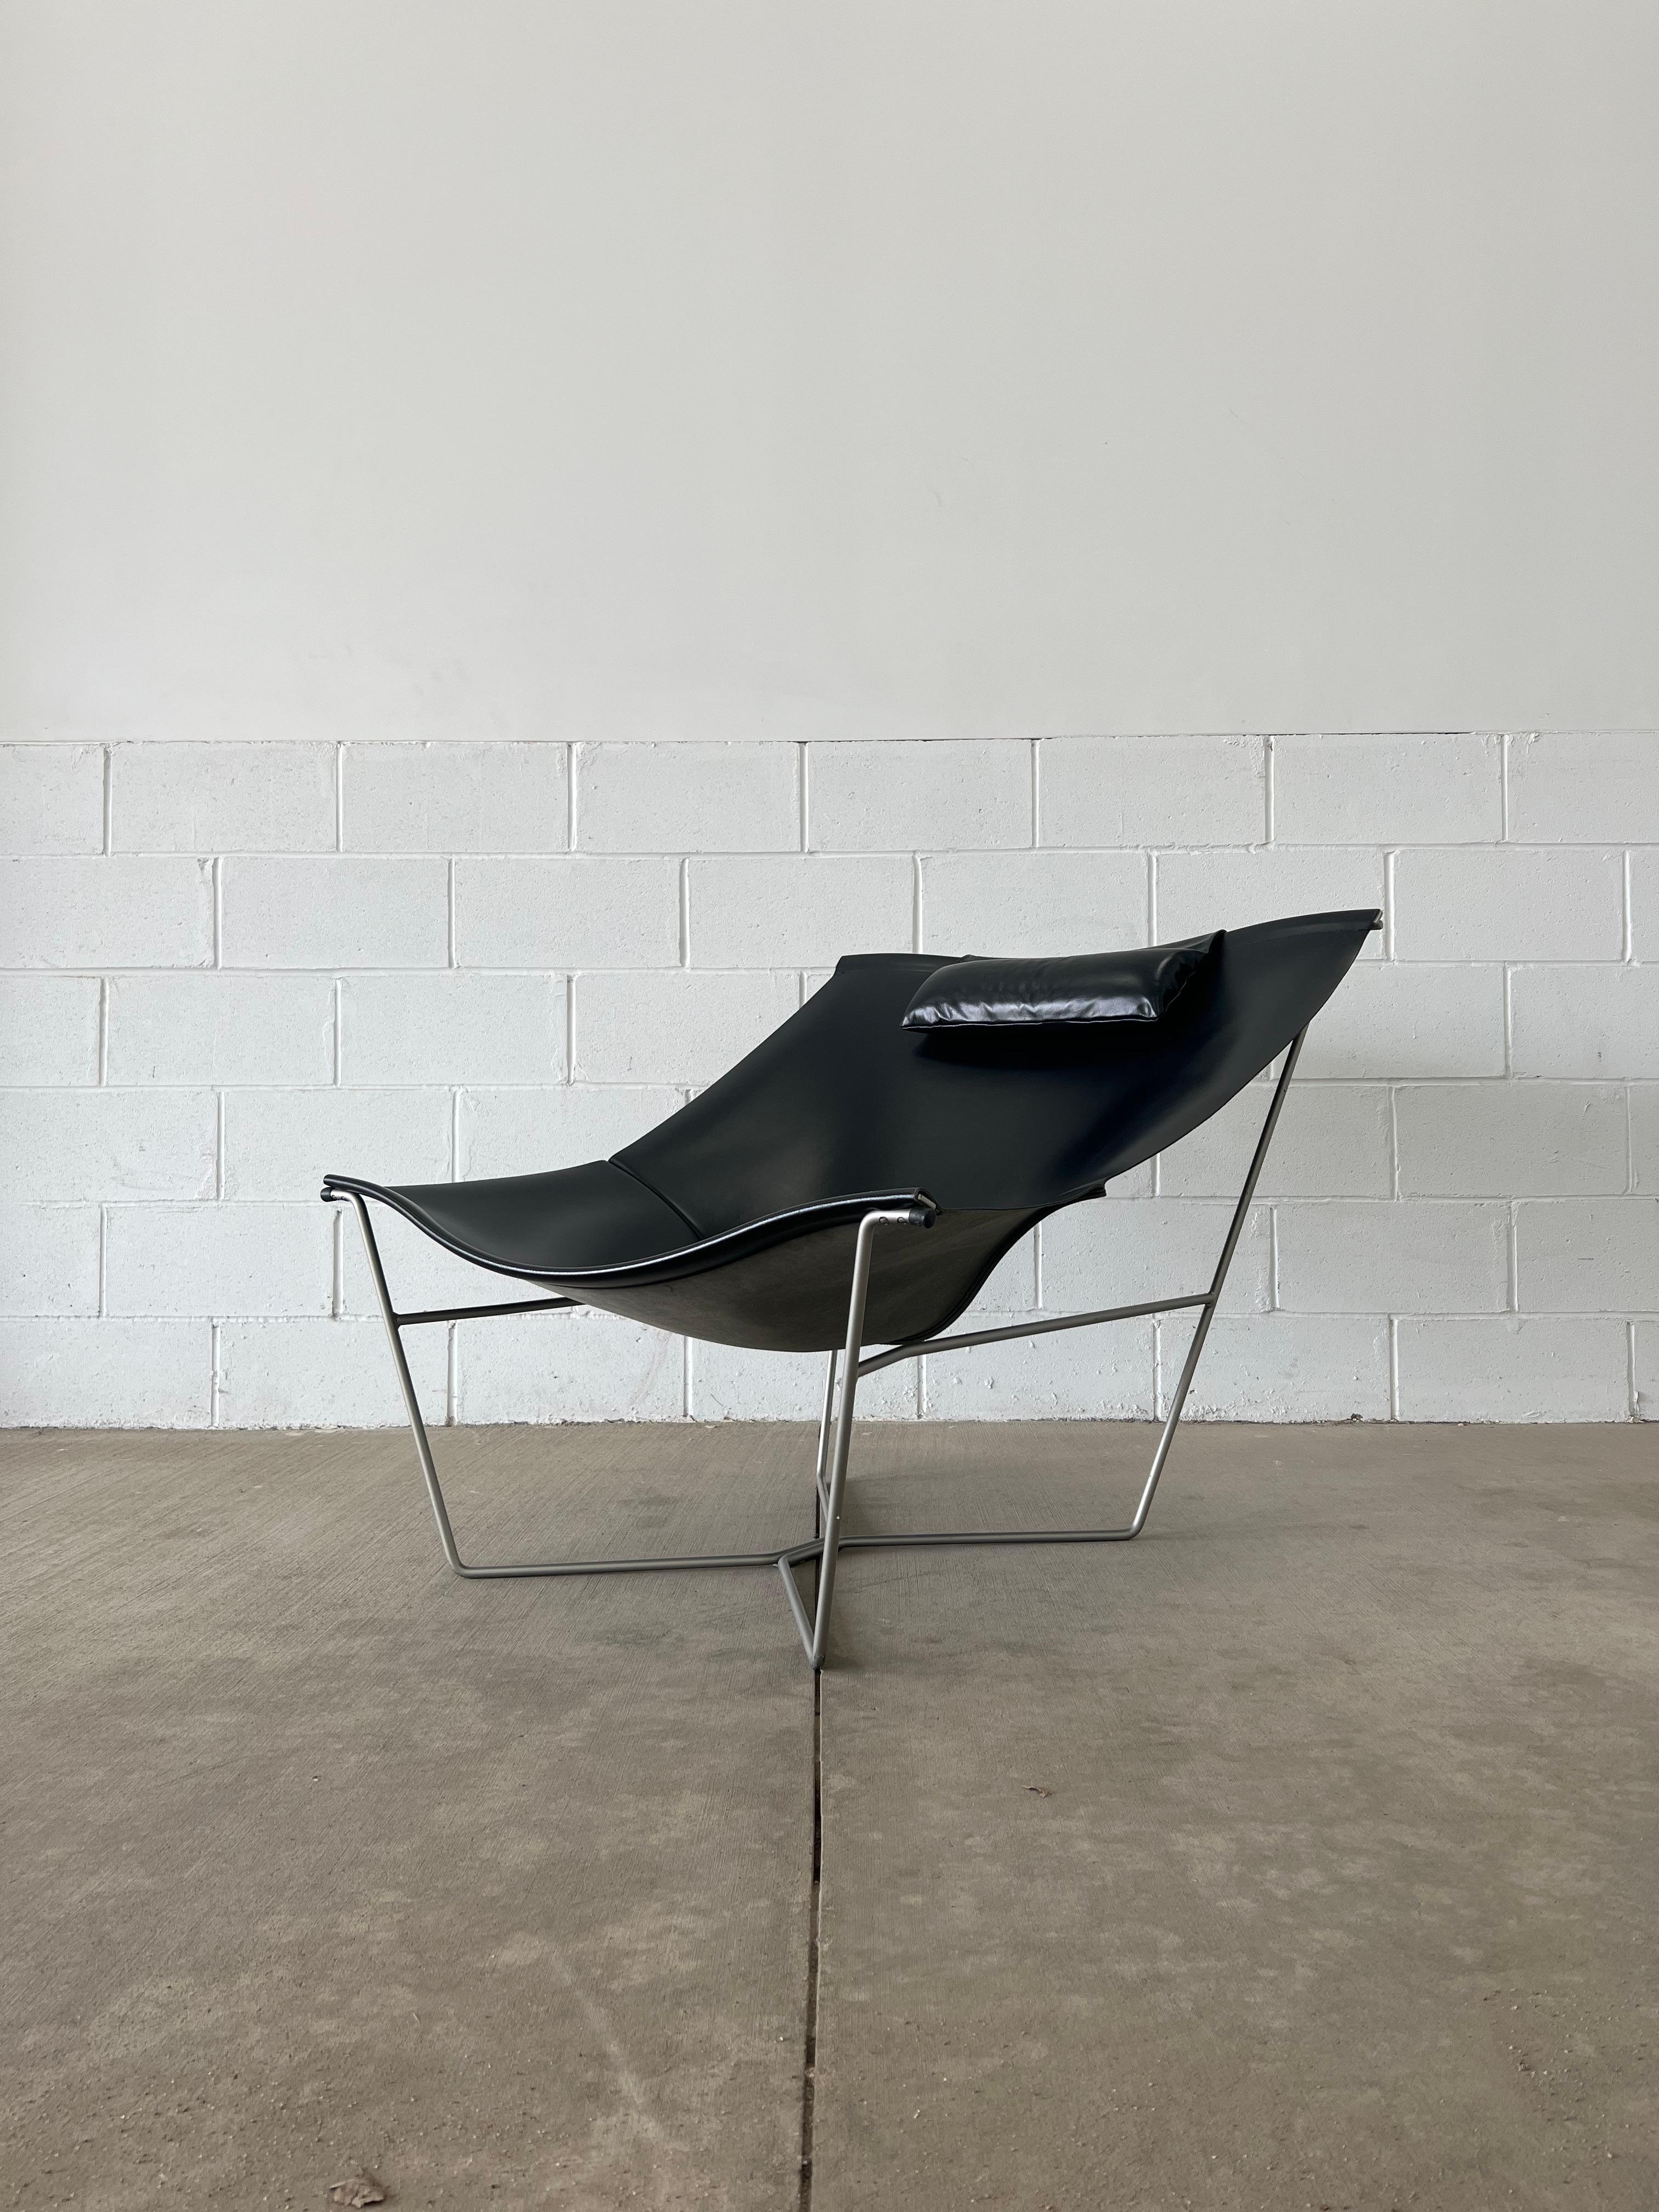 Semana black leather sling chair by David Weeks for Habitat (unmarked), UK, 1990s. The leather is in excellent condition as is the pillow which is placed on the top, held in place by a counterweight. The grey steel frame has some minor scratches and